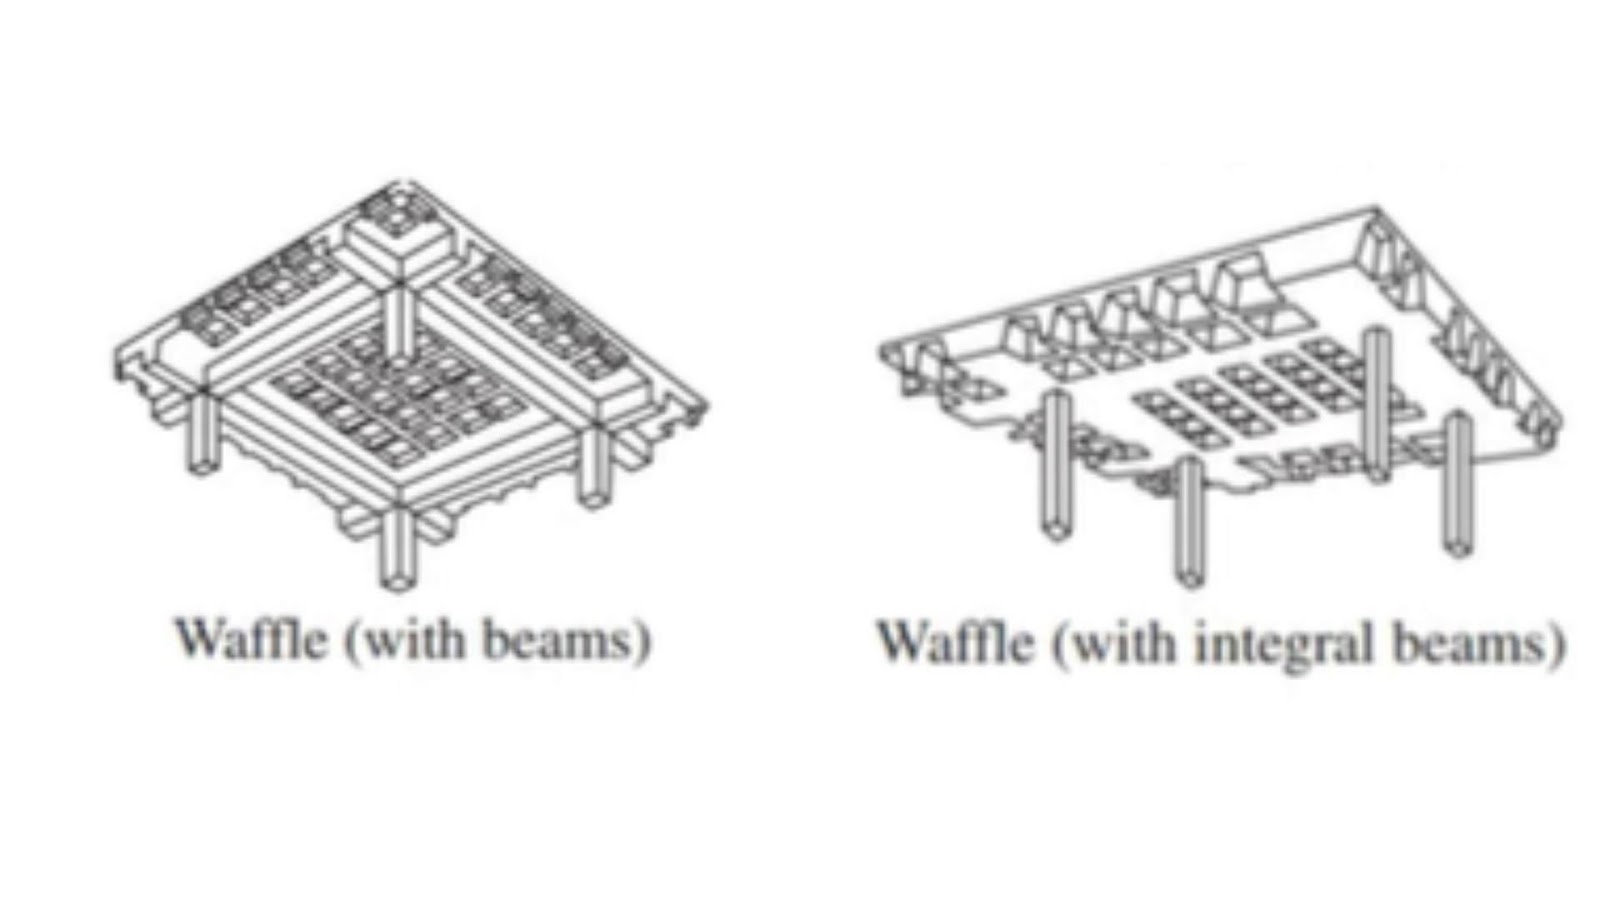 What are the types of waffle slabs?